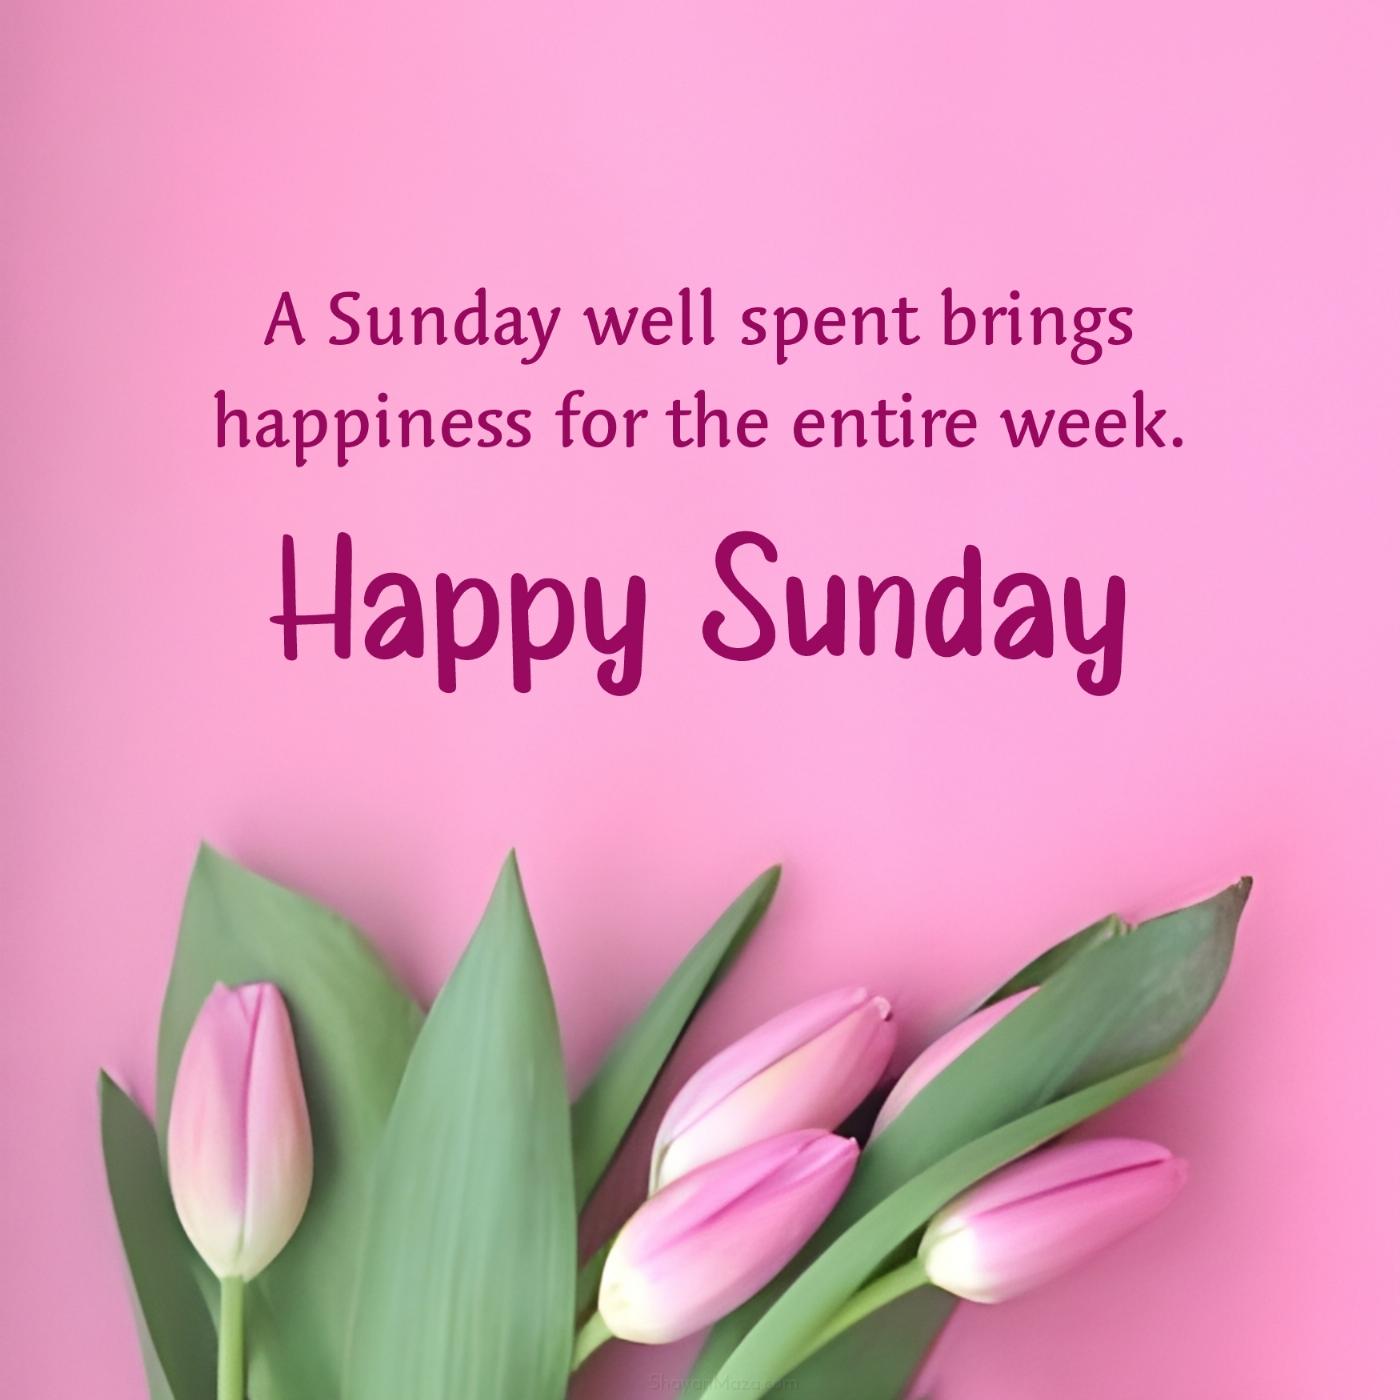 A Sunday well spent brings happiness for the entire week